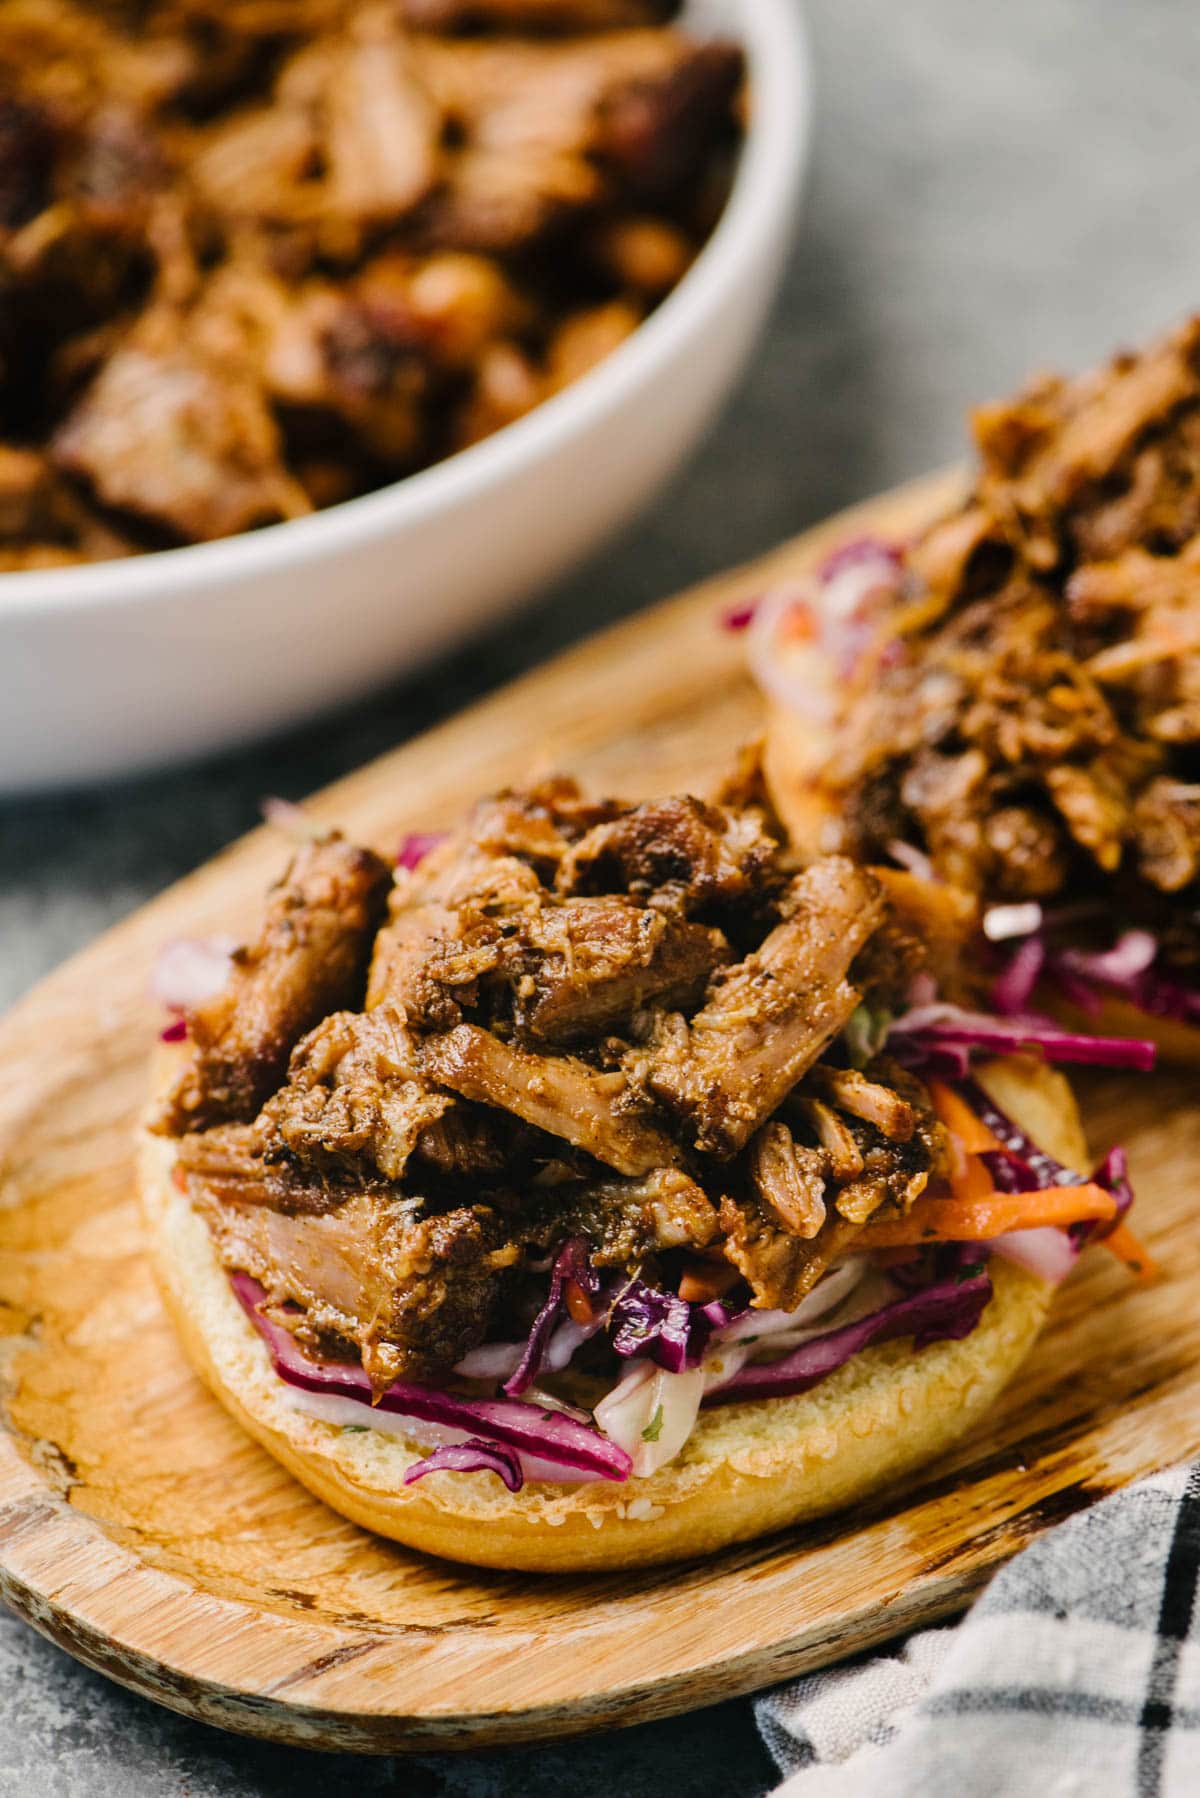 Side view, two open faced pulled pork sandwiches on a wood cutting board; a serving bowl of shredded Instant Pot pulled pork is in the background.